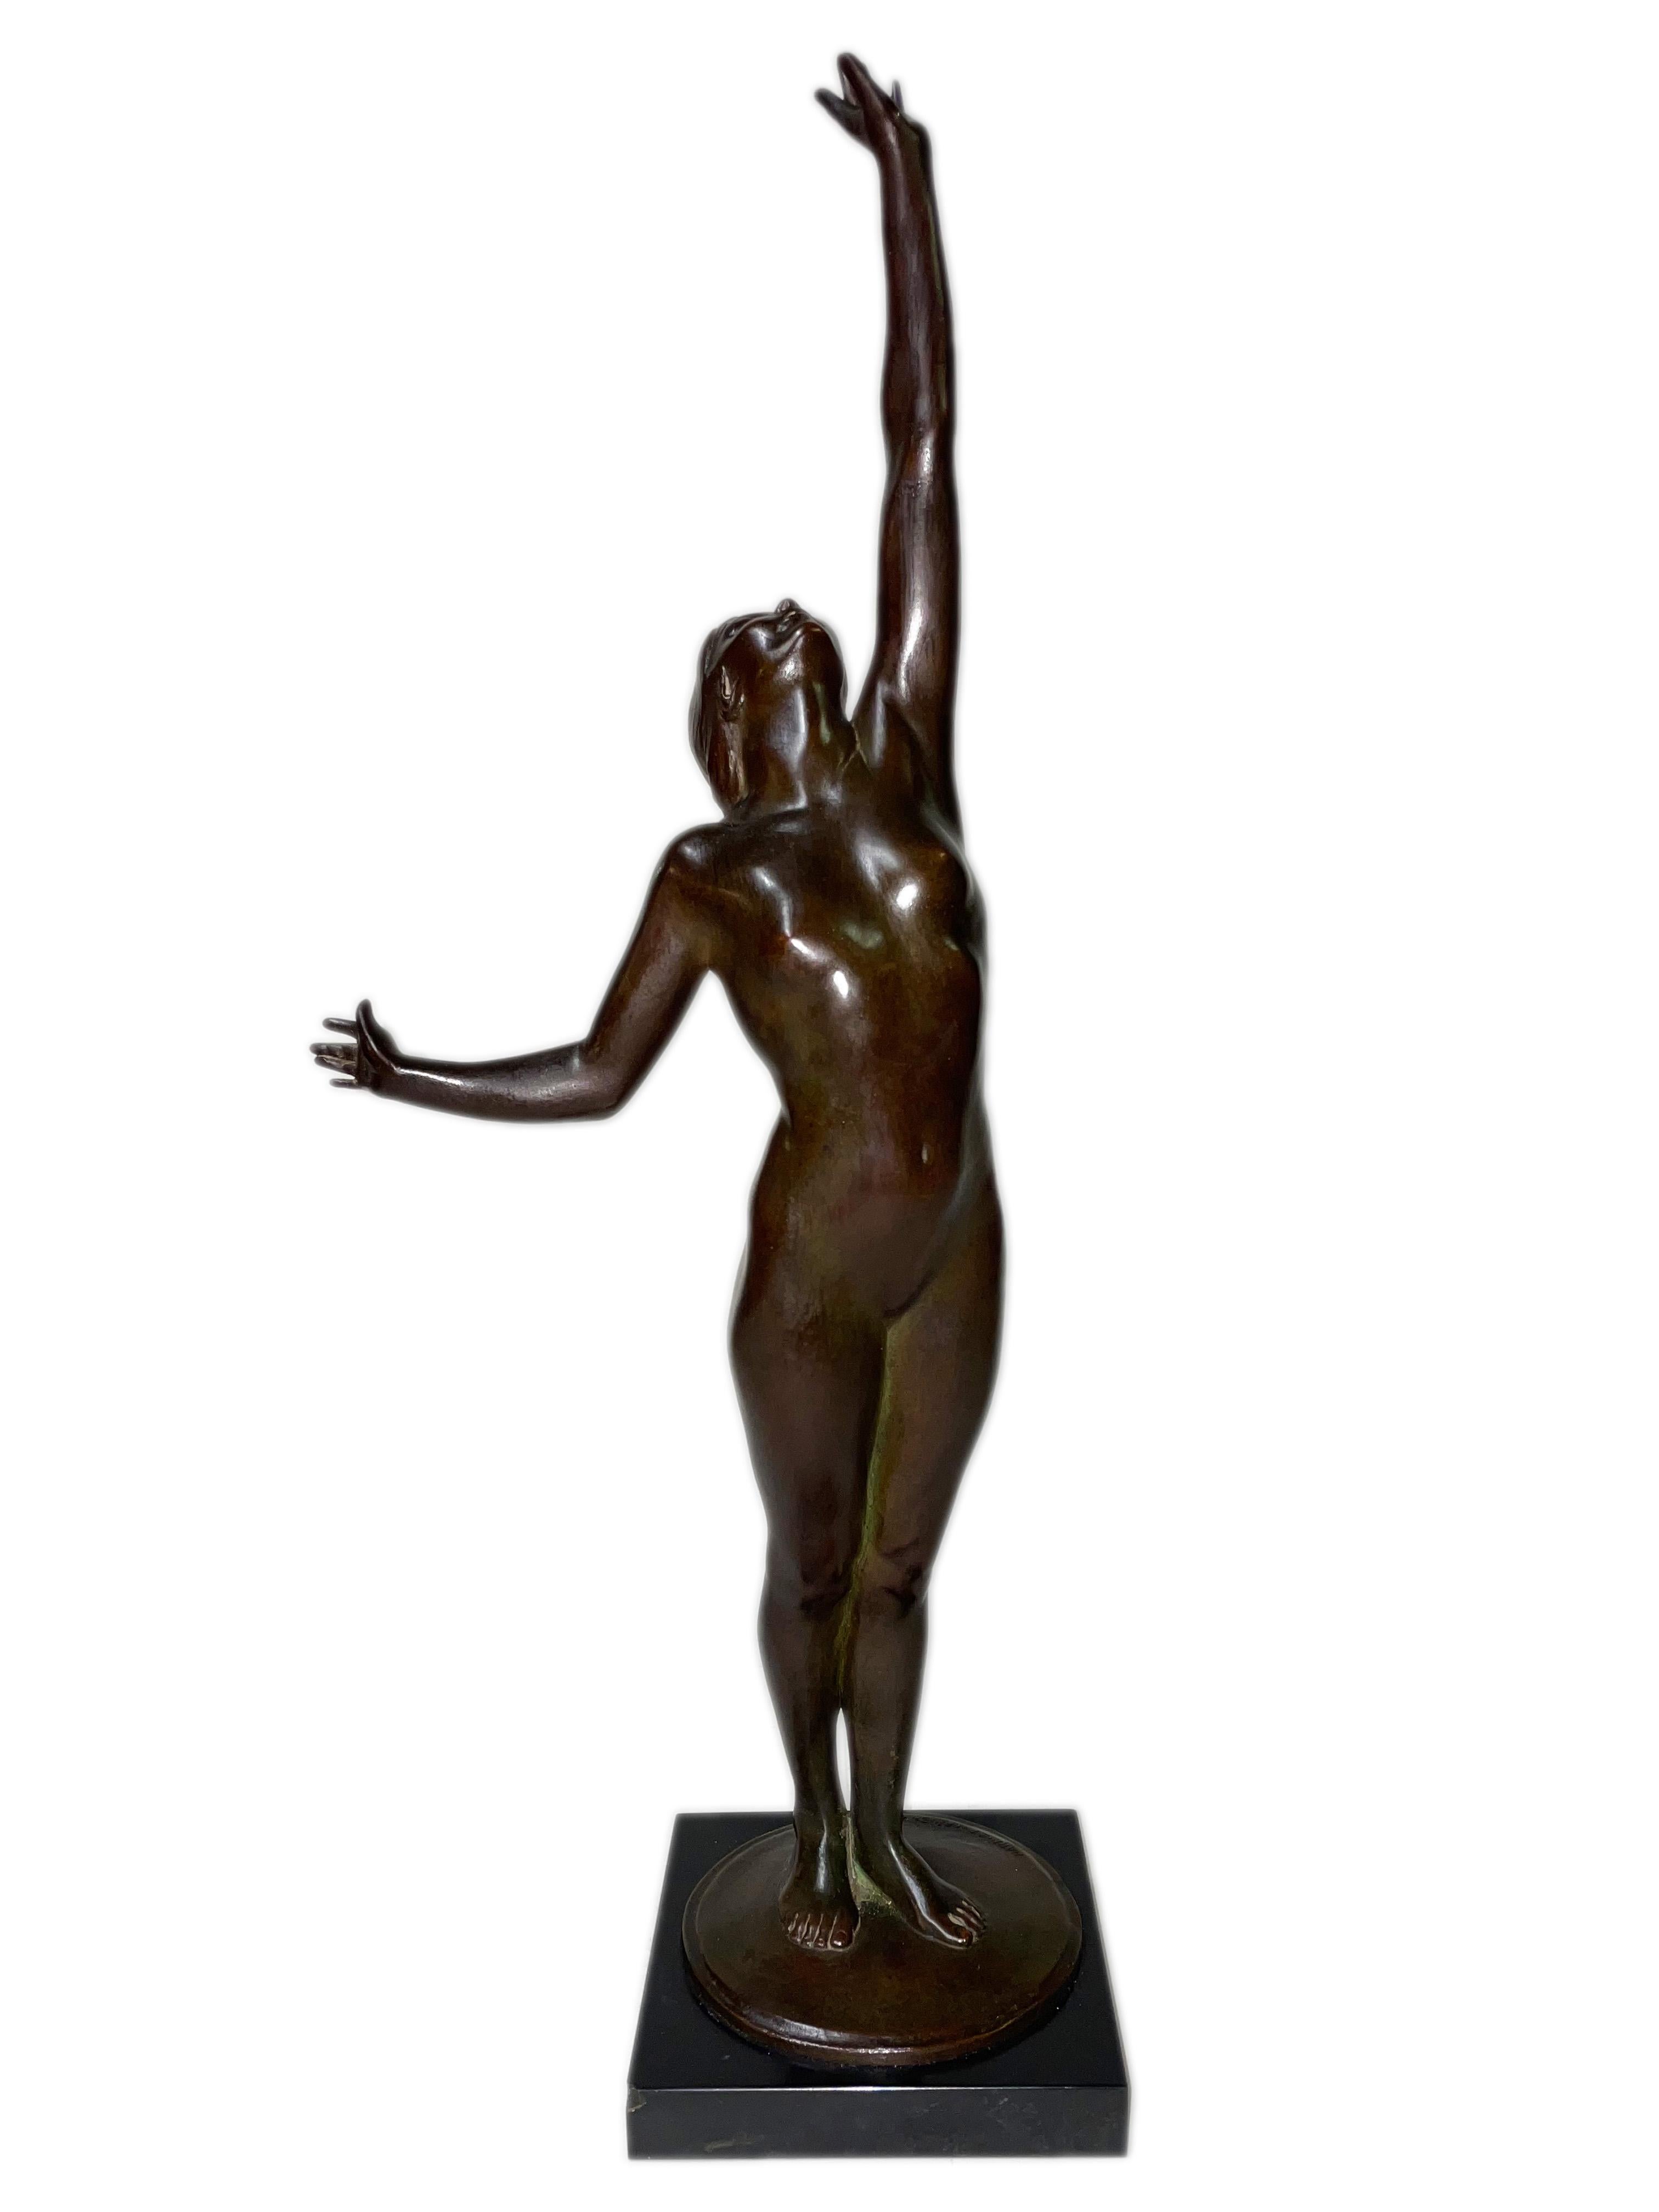 An important and rare early 20th century American Art Nouveau cast and patinated bronze sculpture 